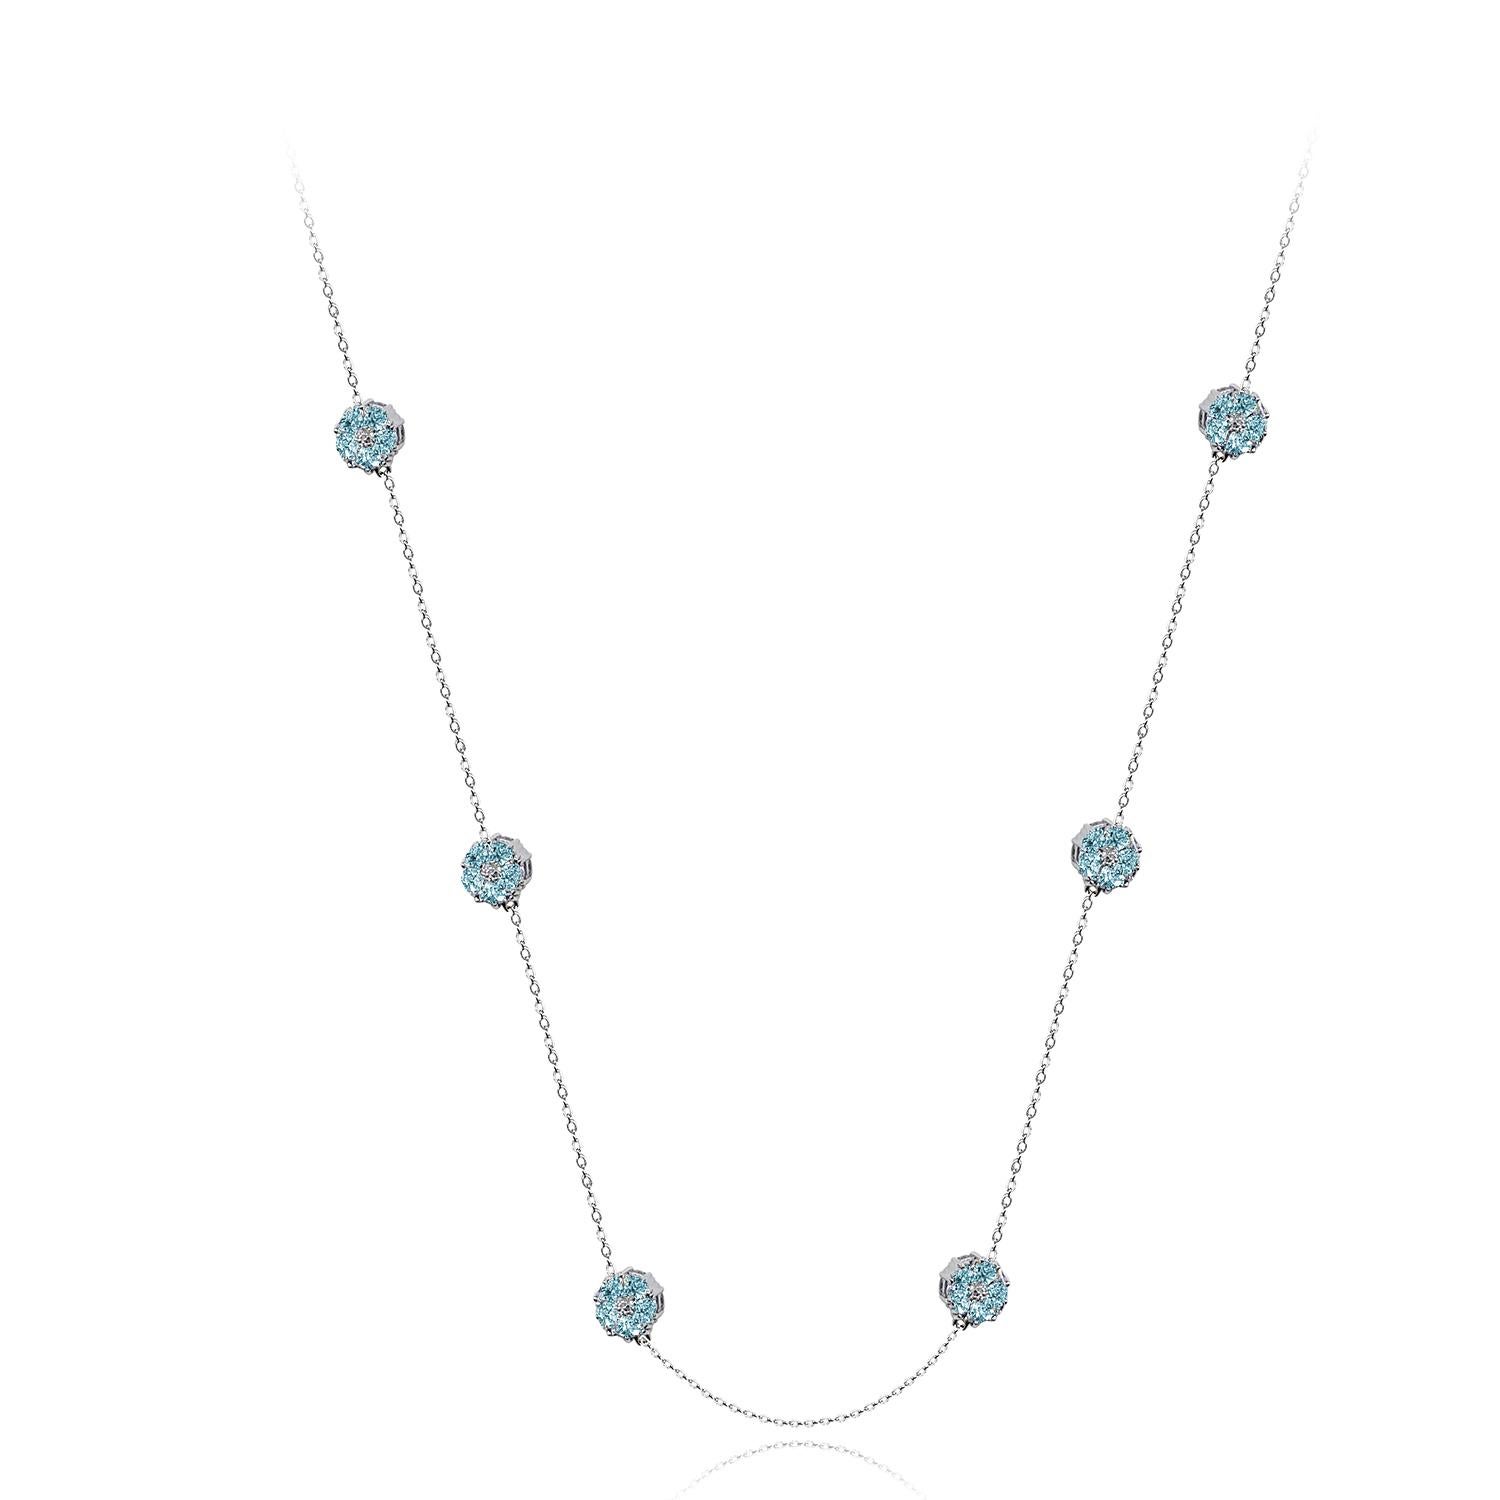 Whatever the season, take a little natural beauty with you everywhere you go. This medium doublesided blossom chain necklace is the perfect complement to any style, day or night. An adjustable .925 sterling silver chain necklace with 3D blossoms